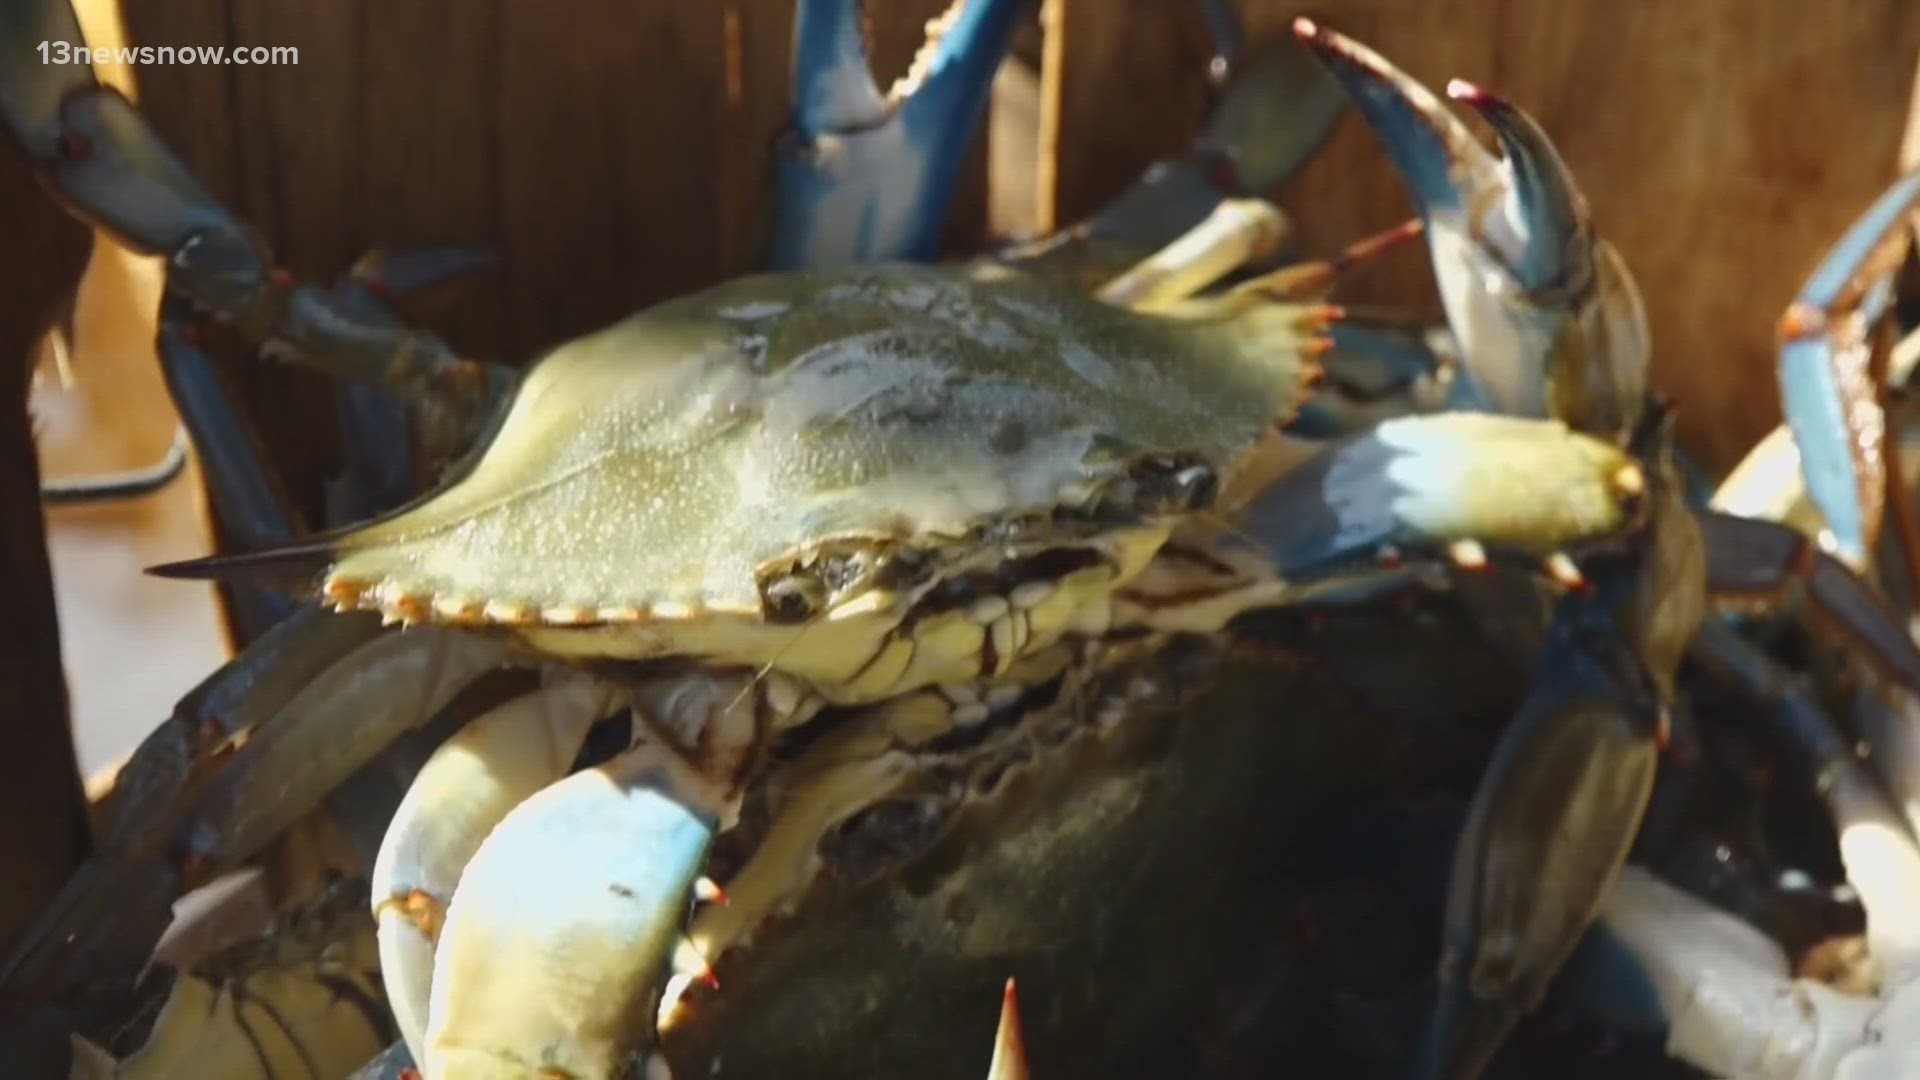 According to the Associated Press, 50% of clams, mussels and oysters have been wiped out by the blue crab in Italy.